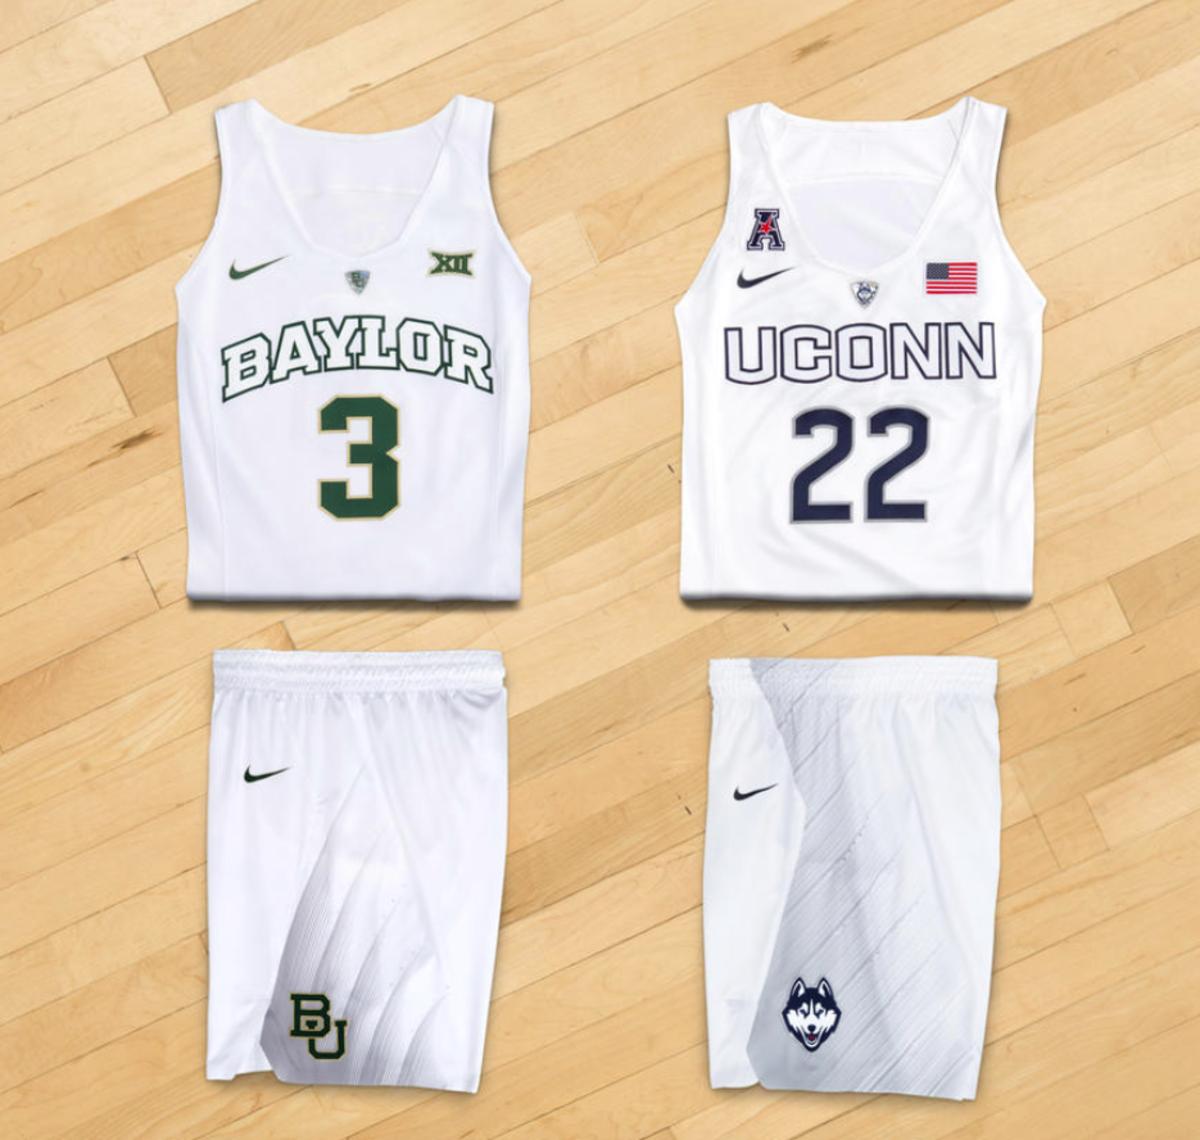 Nike reveals eight new NCAA uniforms, includes ‘wipe zones’ on shorts